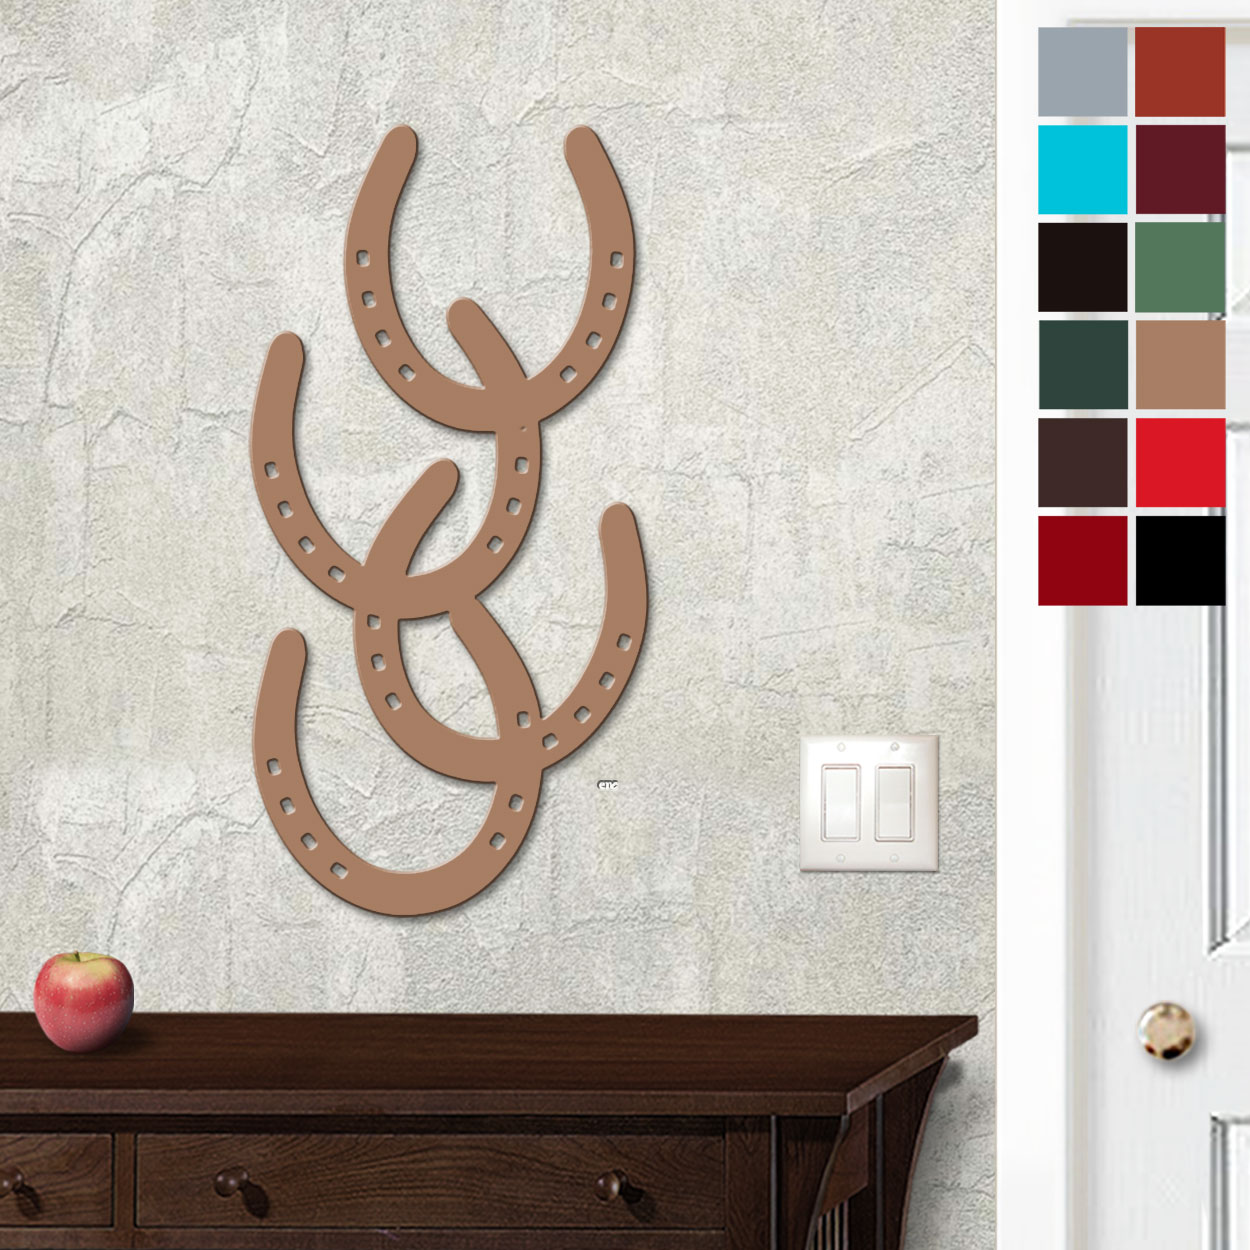 625411 - 18in or 24in Floating Metal Wall Art - Horseshoes - Choose Color